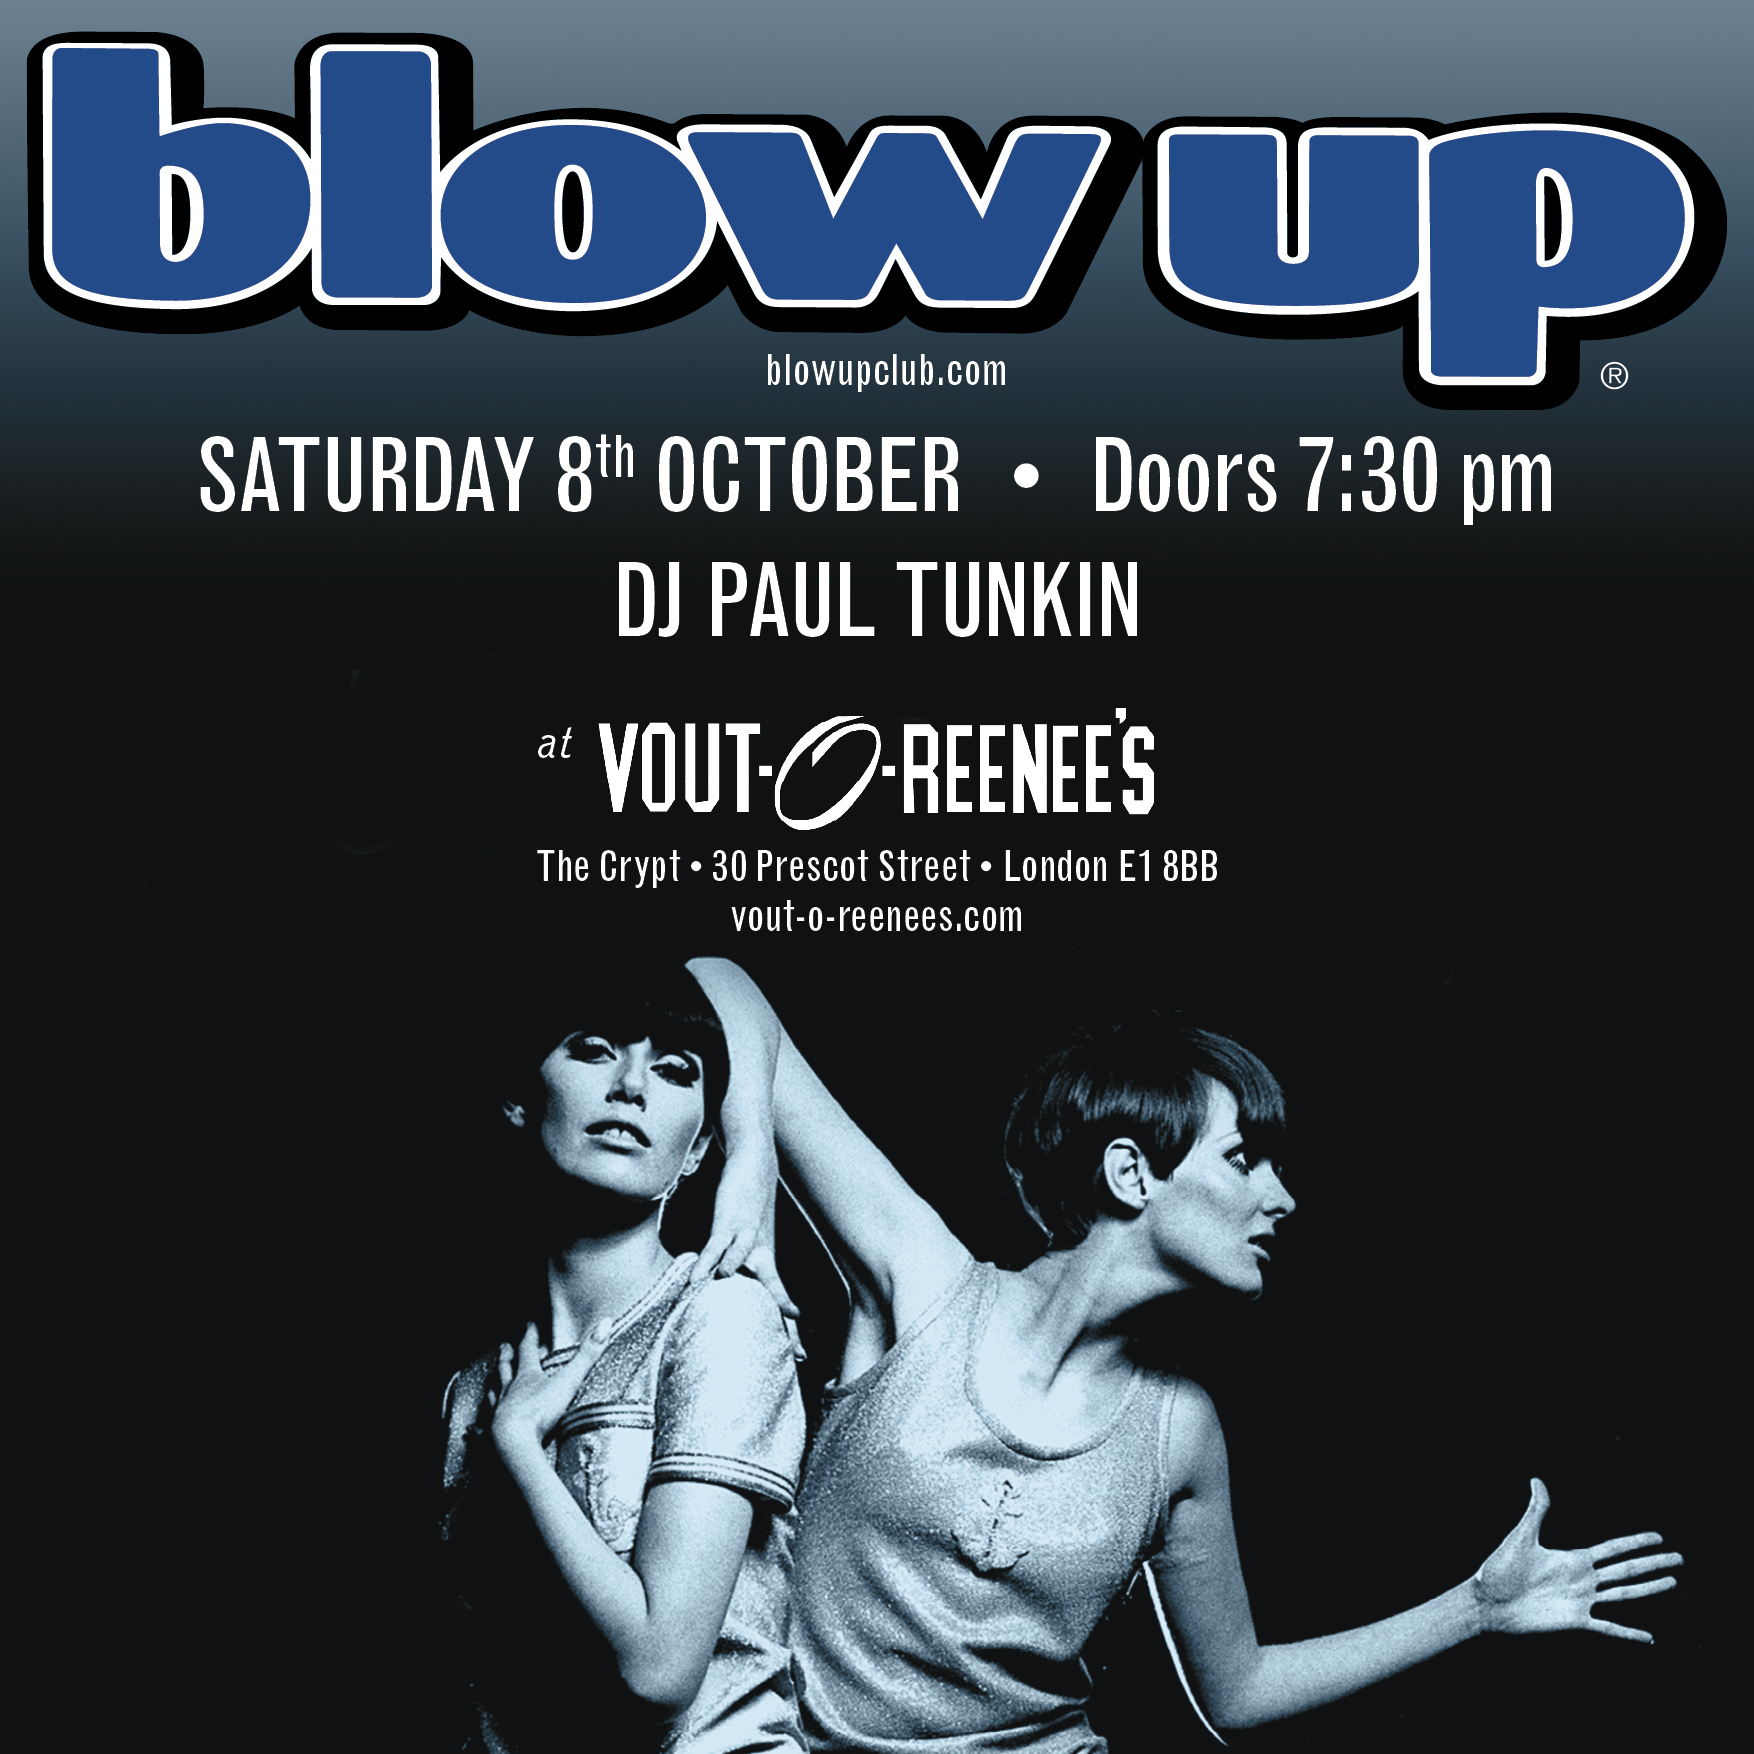 Blow Up! A night of music and dancing Dj Paul Tunkin